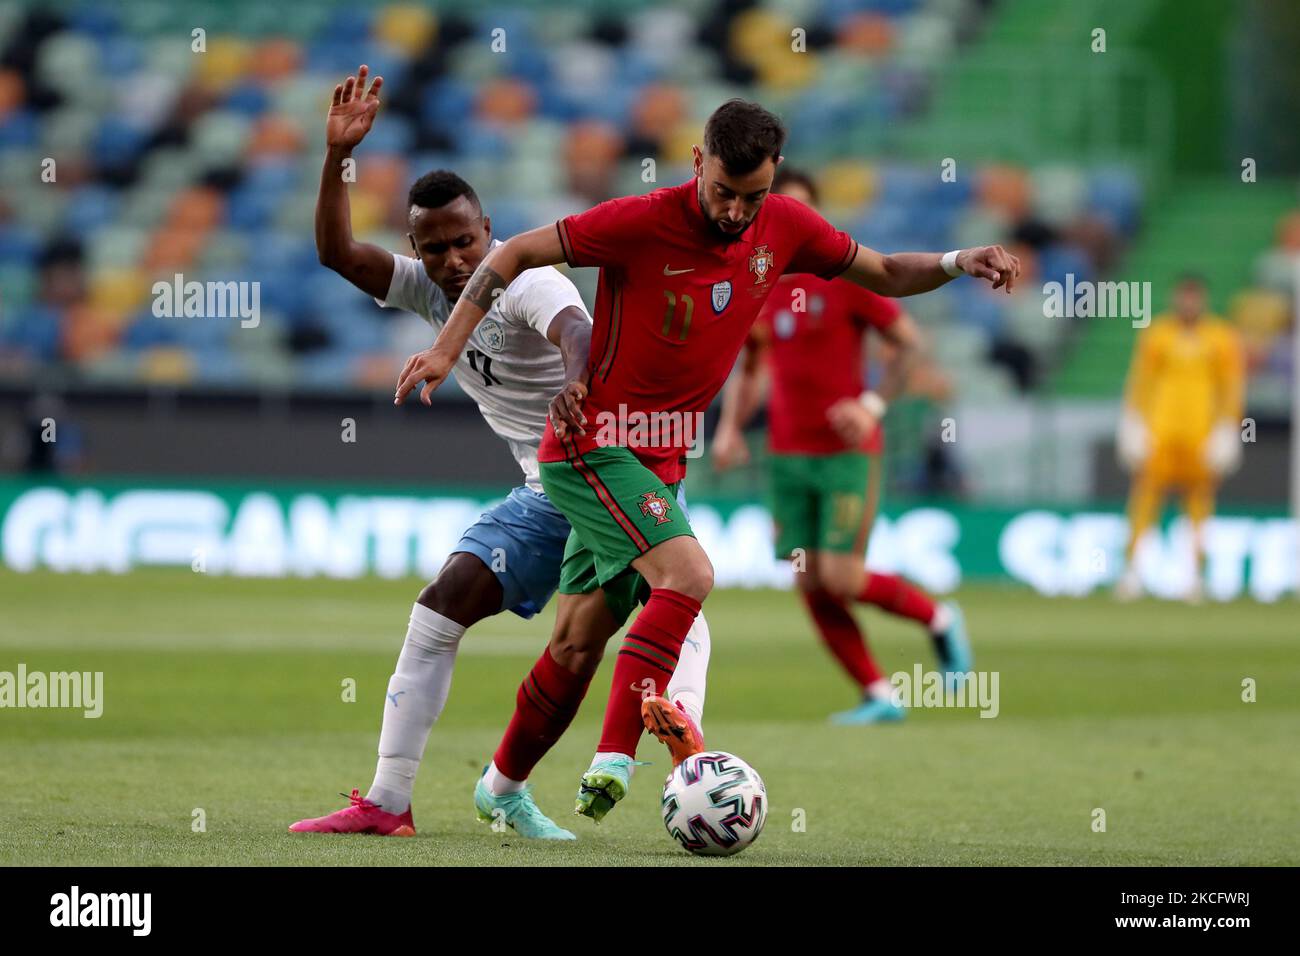 Bruno Fernandes of Portugal (R ) vies with Gadi Kinda of Israel during the international friendly football match between Portugal and Israel, at the Jose Alvalade stadium in Lisbon, Portugal, on June 9, 2021, ahead of the UEFA EURO 2020 European Championship. (Photo by Pedro FiÃºza/NurPhoto) Stock Photo